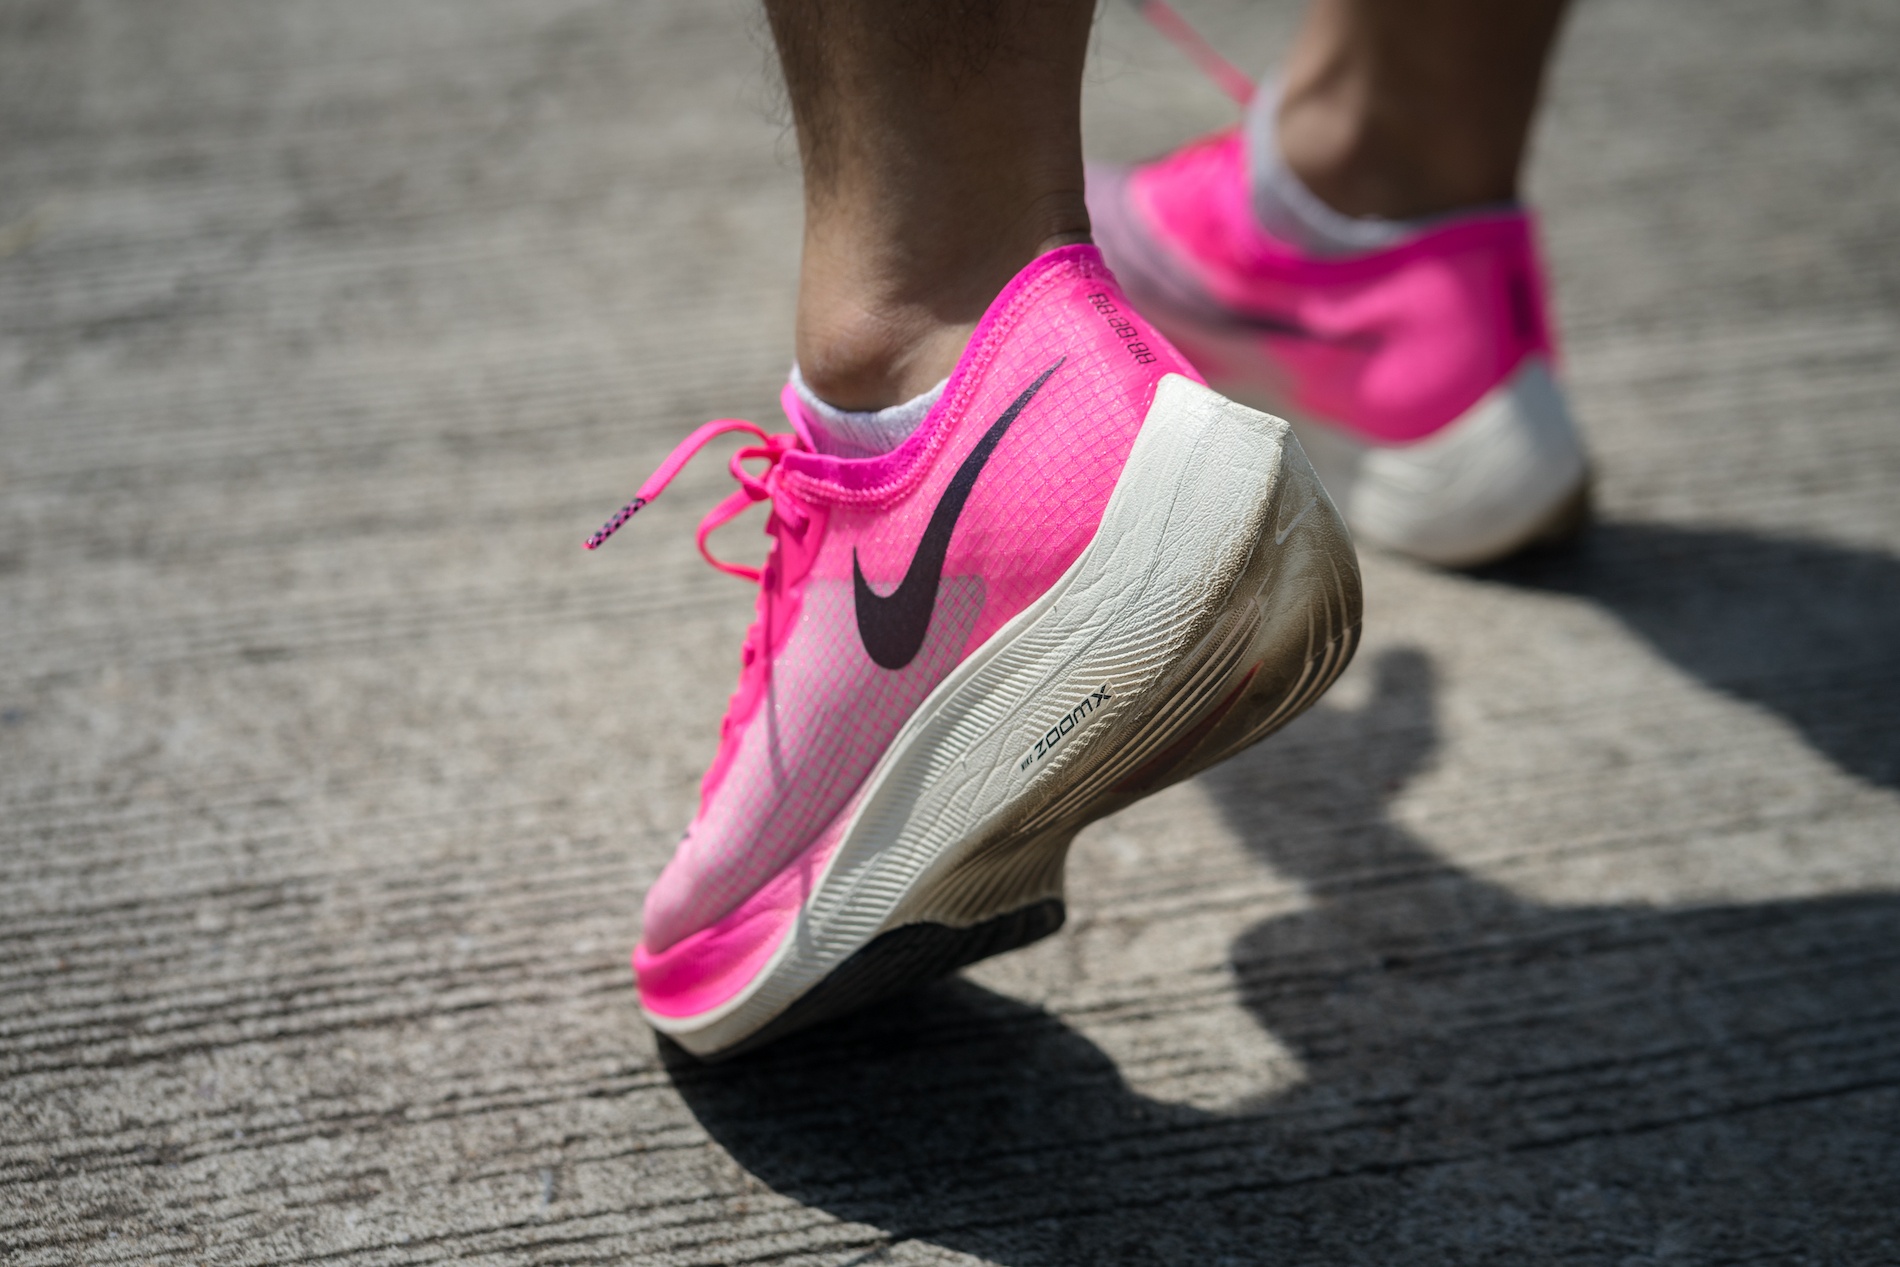 Now Casting: Nike Social Media Campaign Needs Recreational Runners + 3 More Gigs